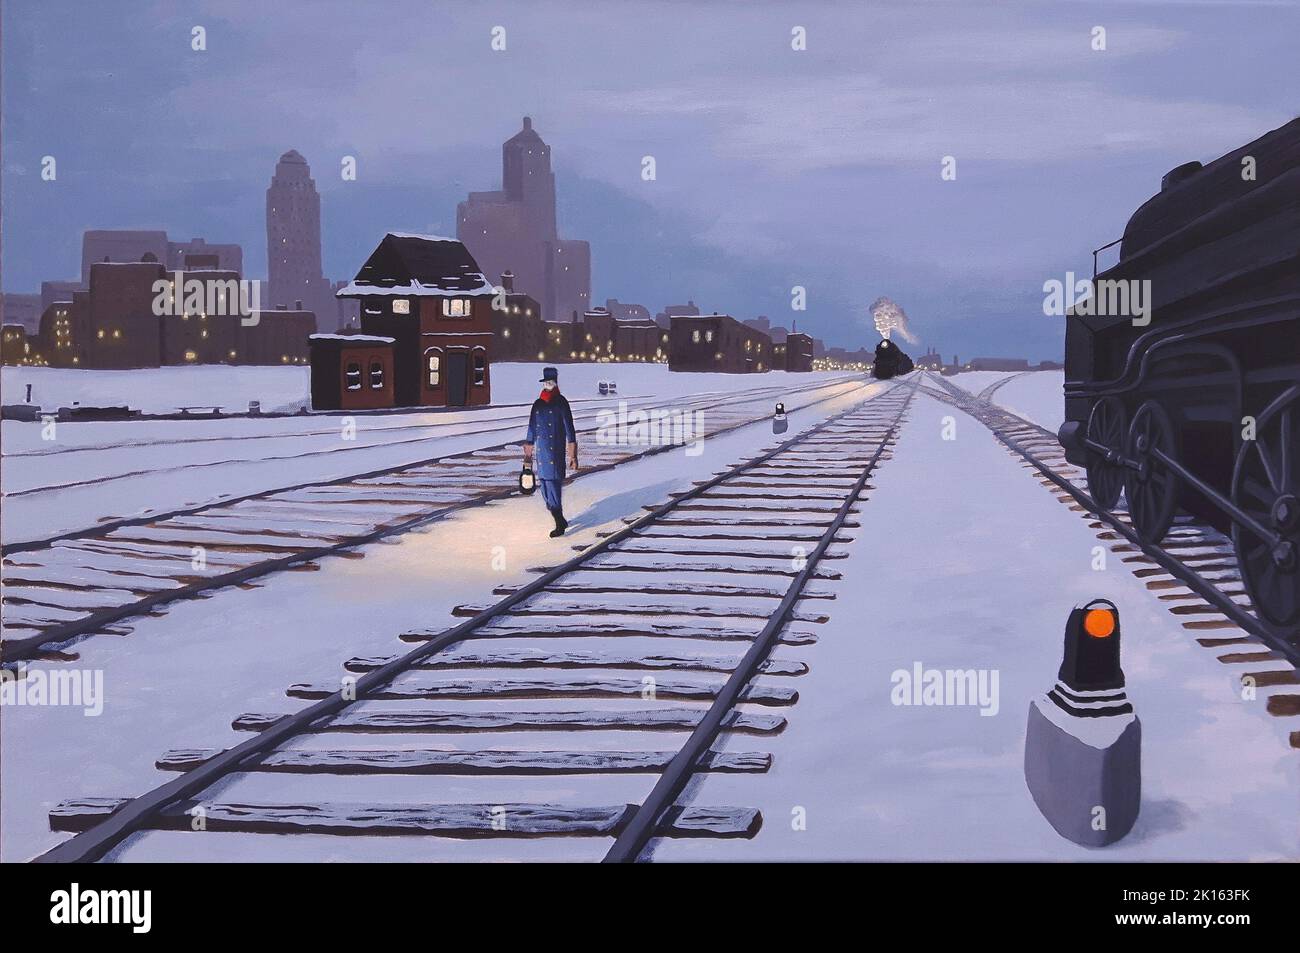 1940s scene of a railway worker holding a lamp and walking along the tracks on a winter evening in Toronto, Canada. Stock Photo